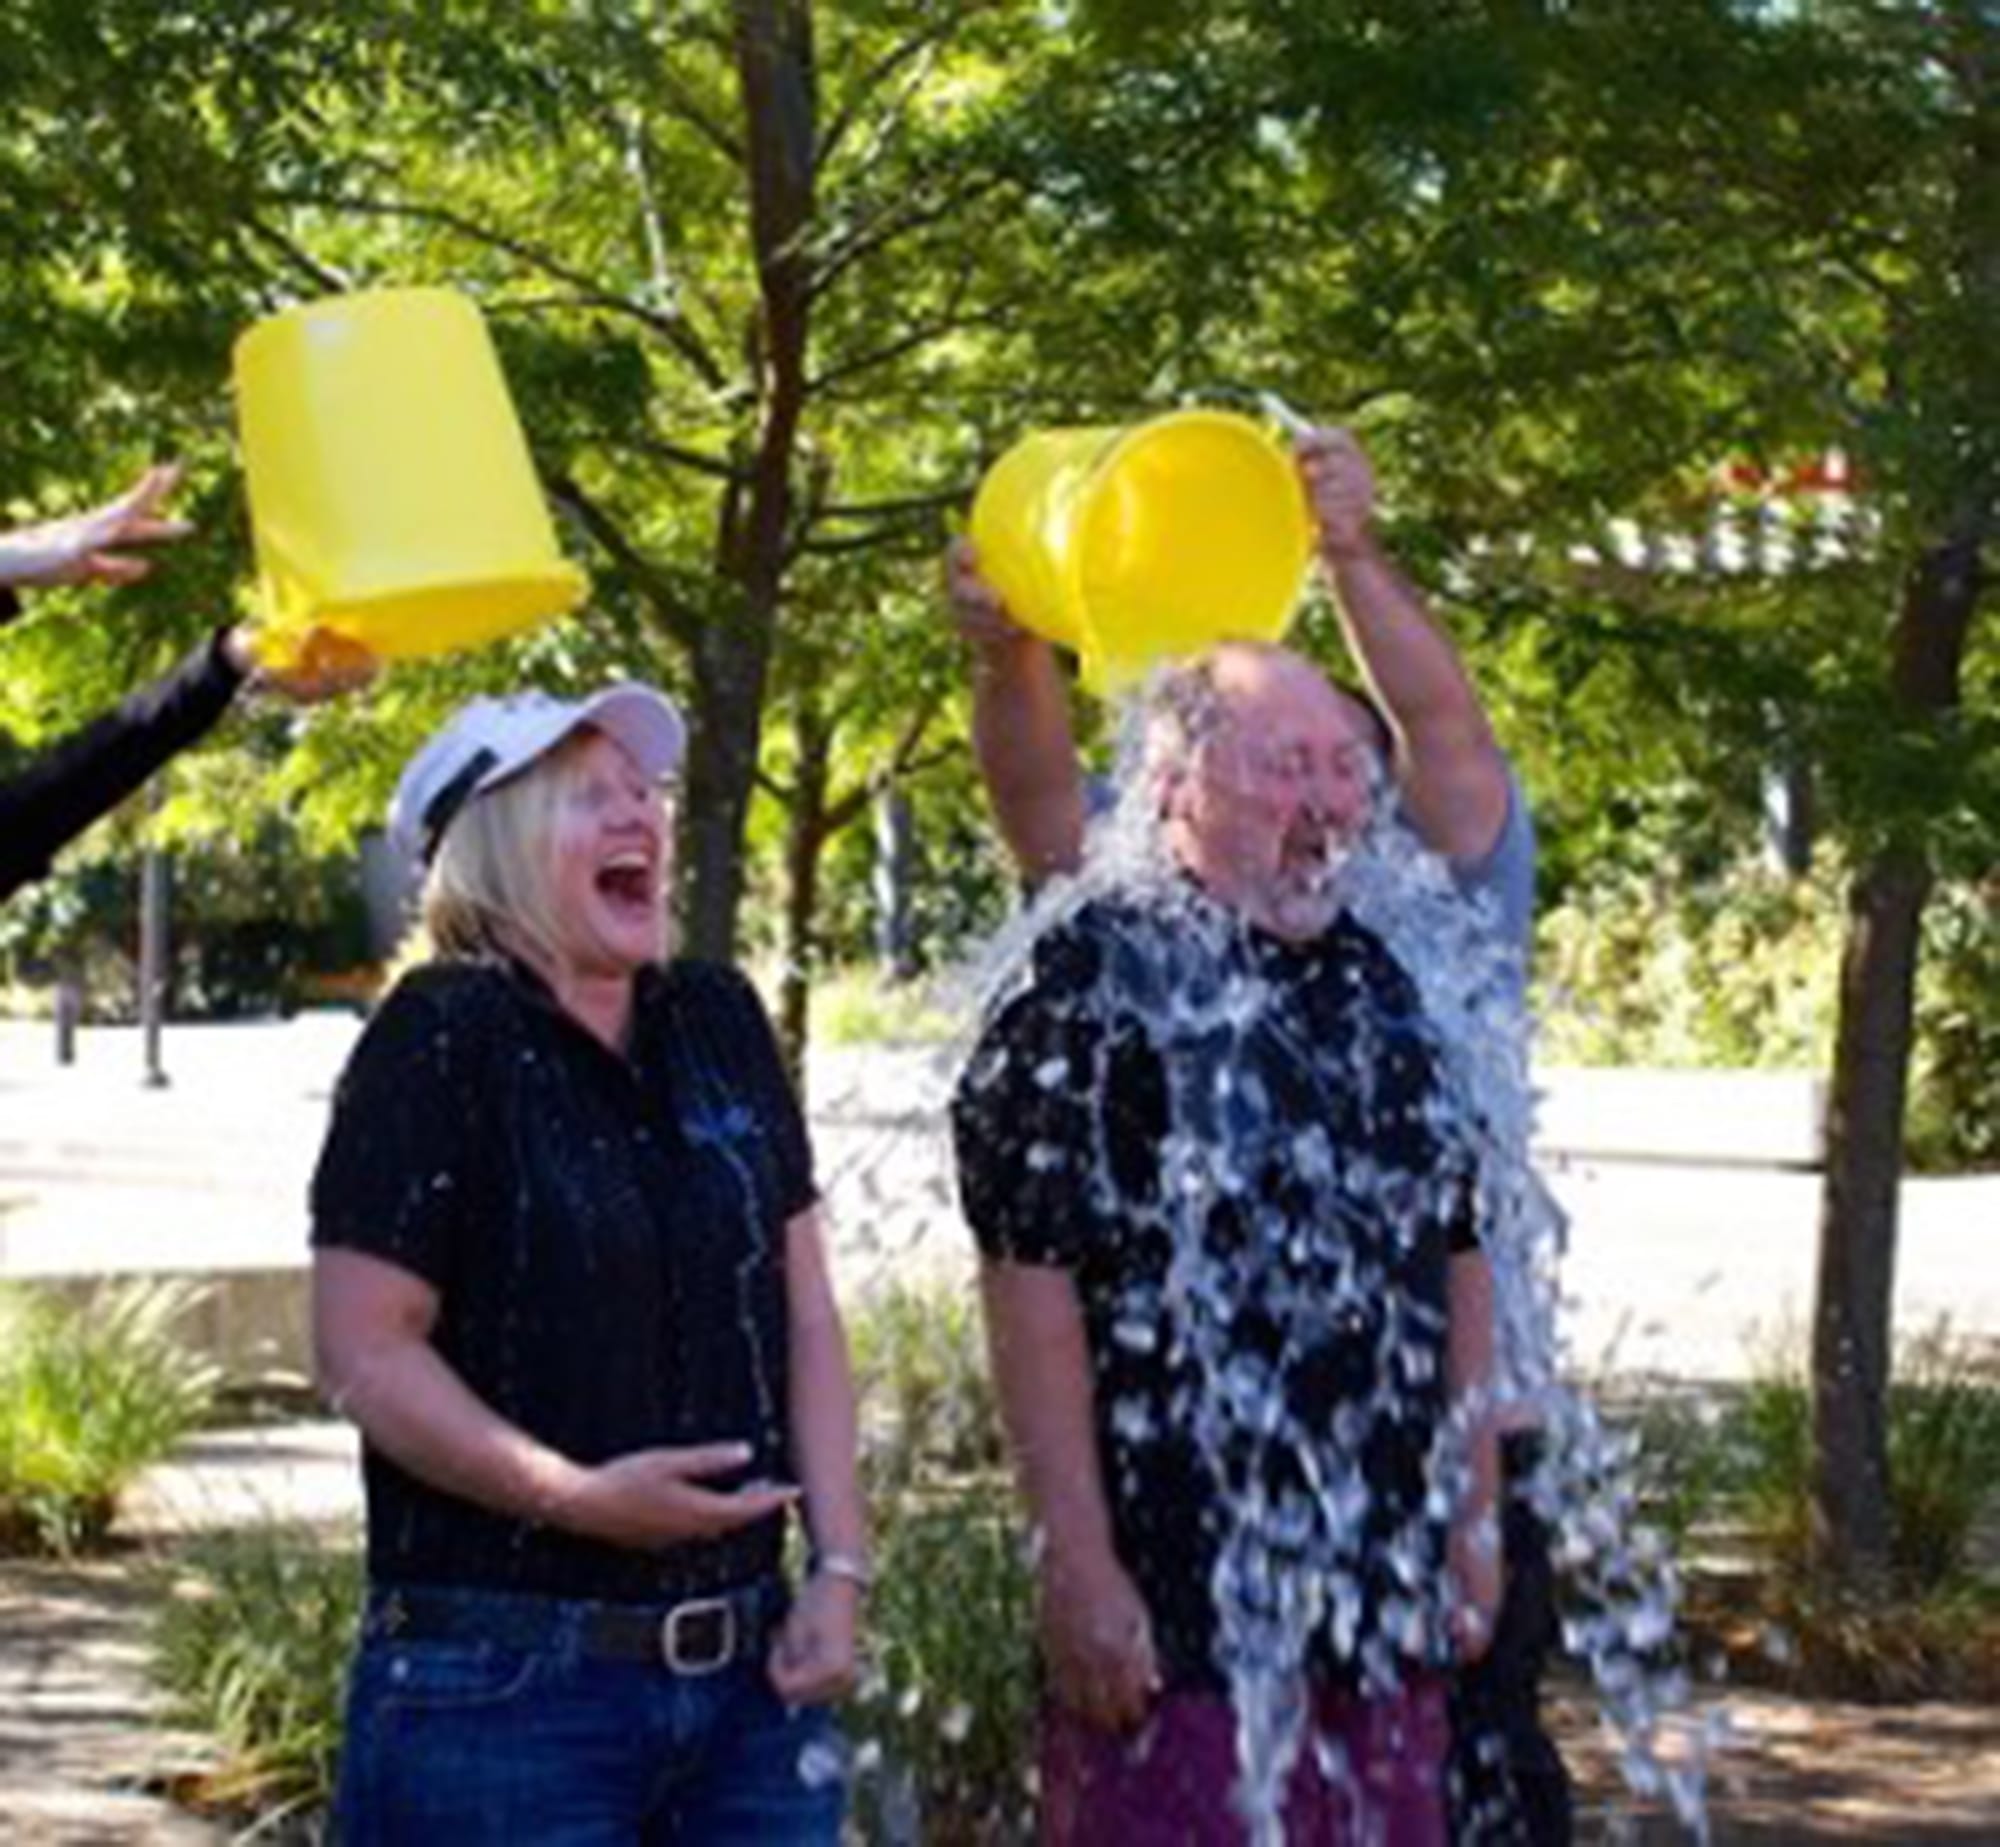 Clark County: Monique and Wes Rice, who run Effective Web Solutions in Washougal, take the Ice Bucket Challenge for the ALS Association during their company's five-year anniversary party on Aug.